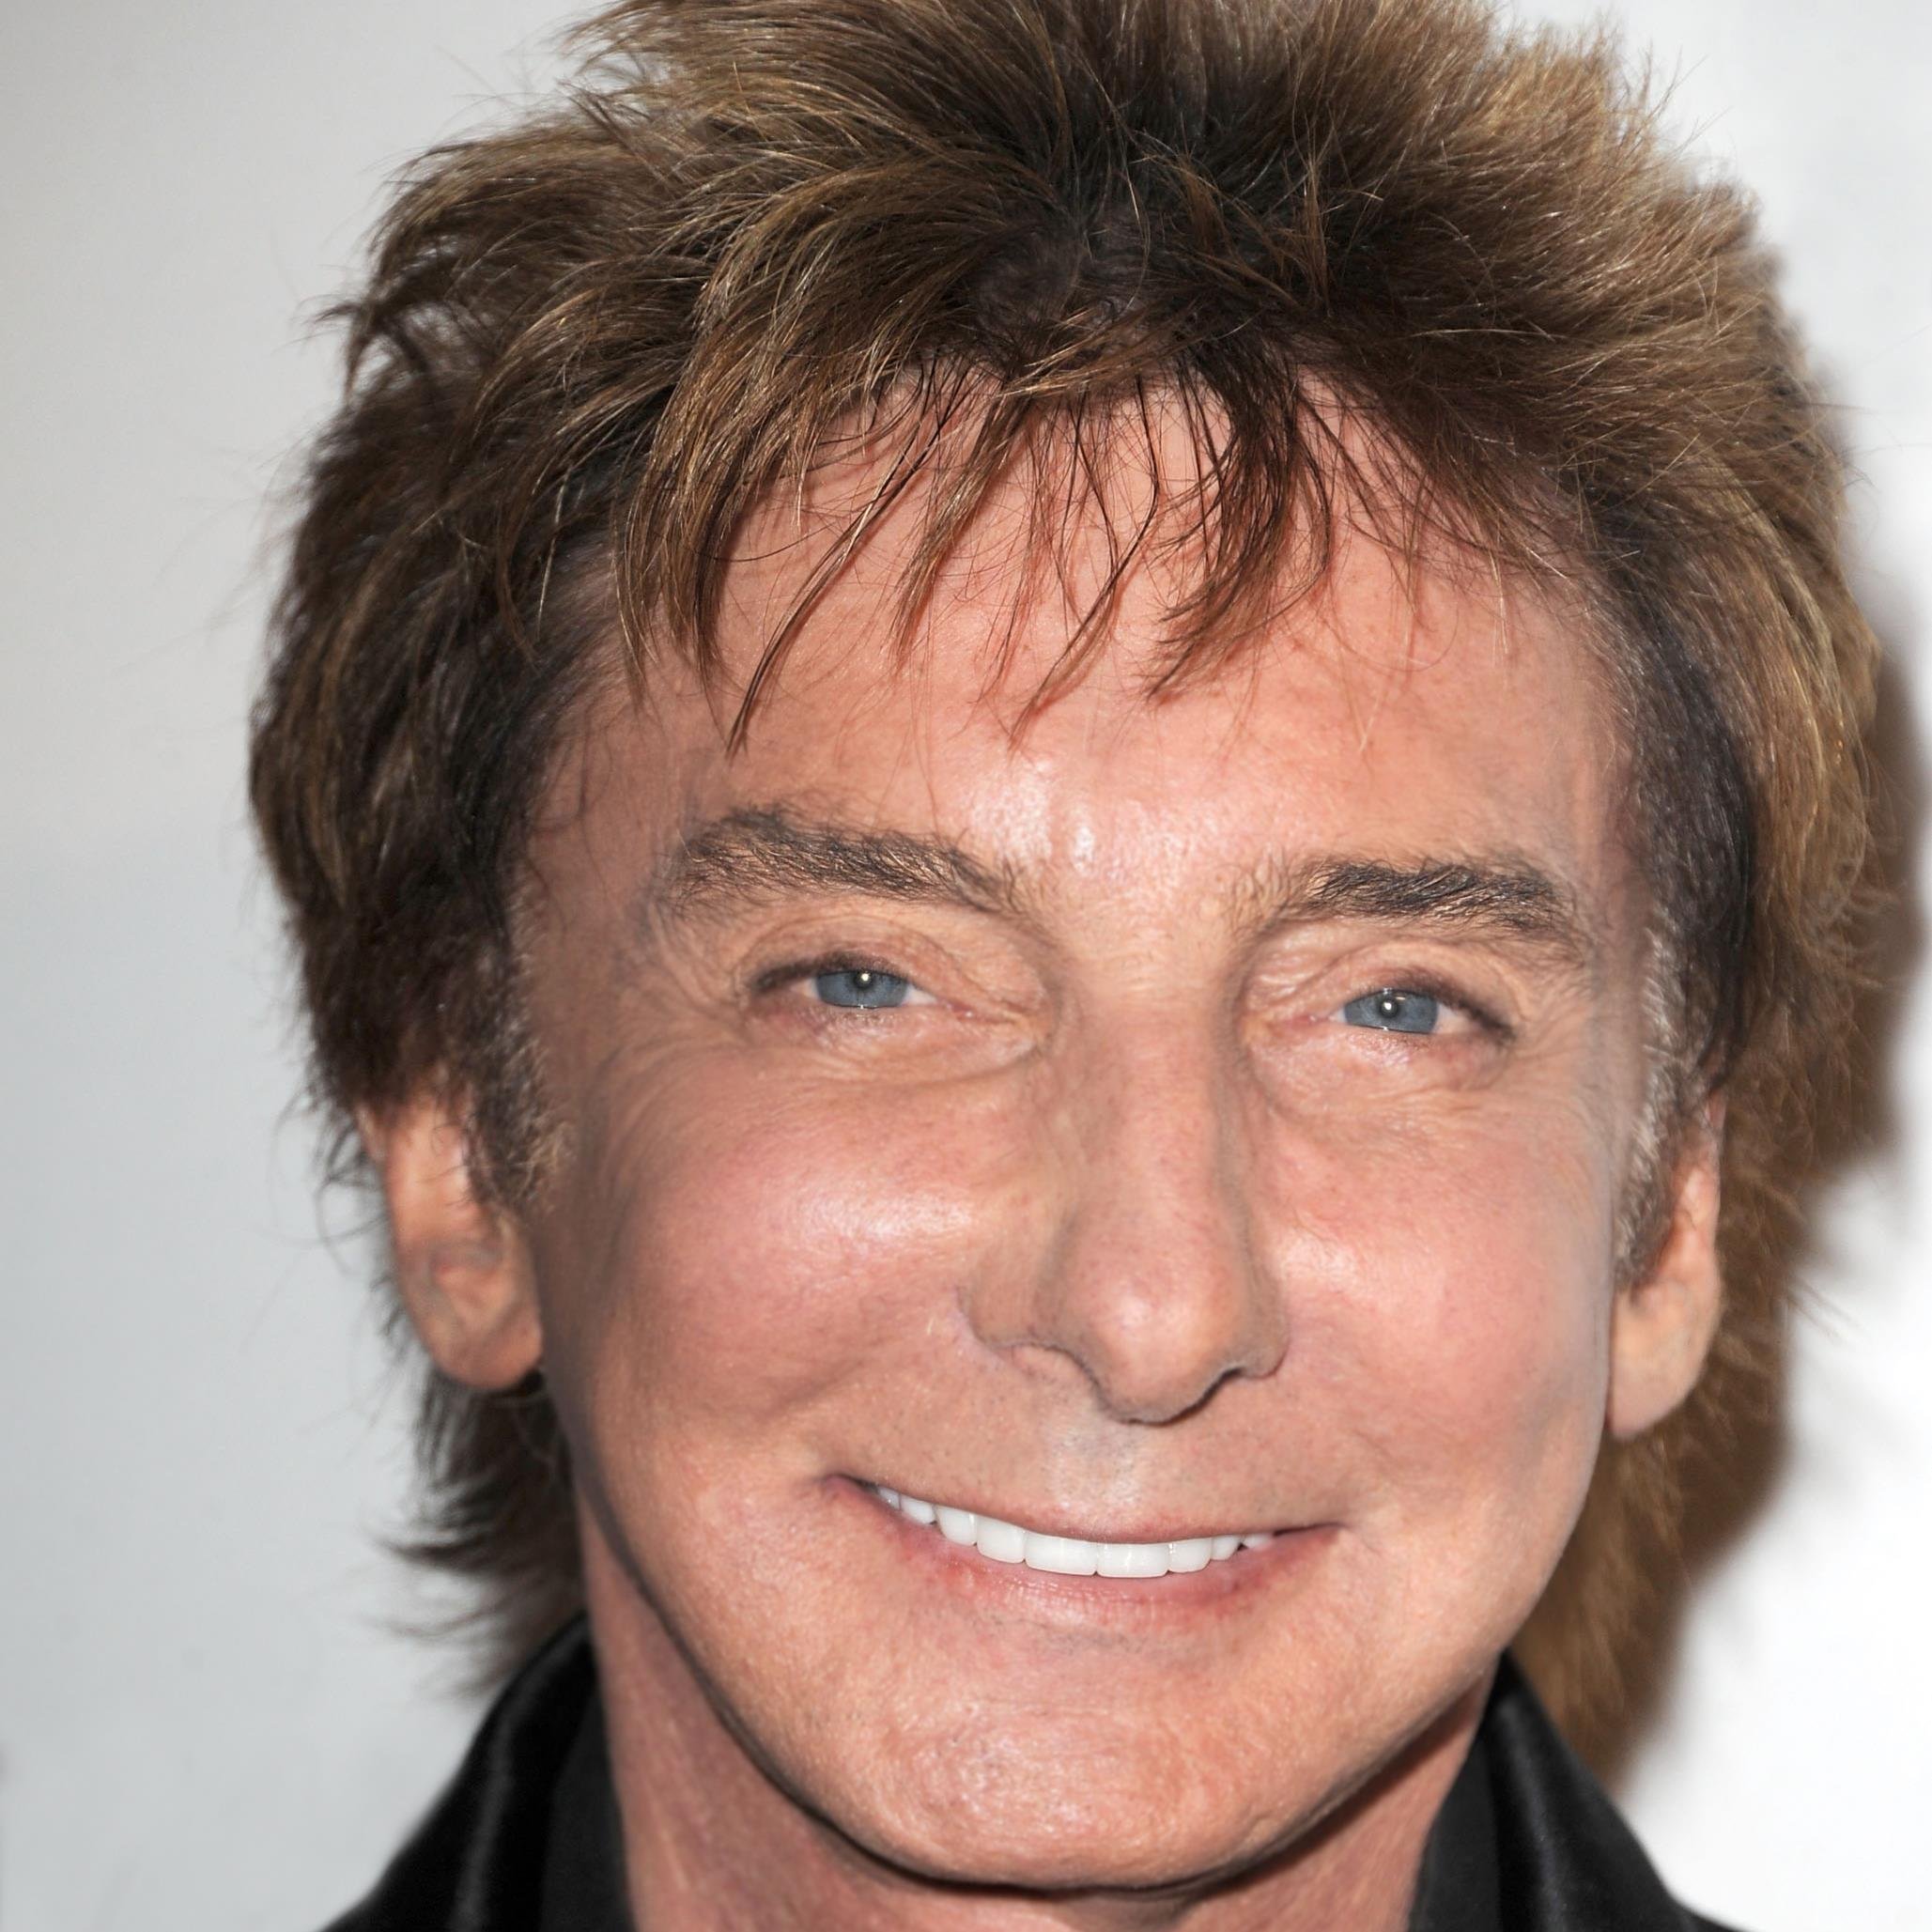 Barry Manilow #9